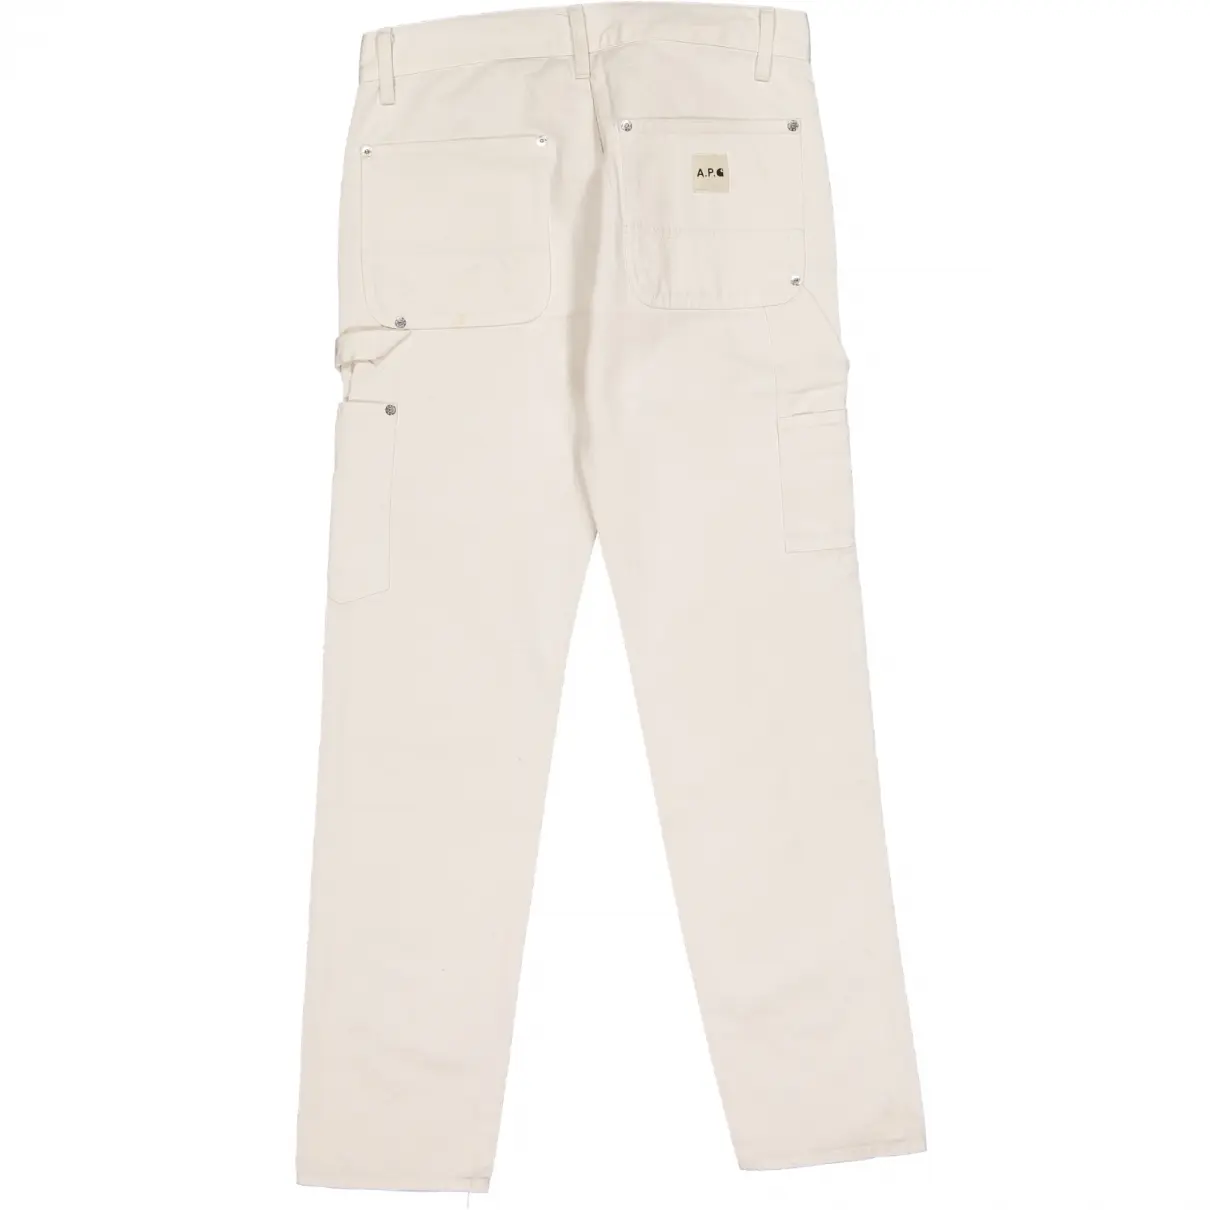 APC Trousers for sale